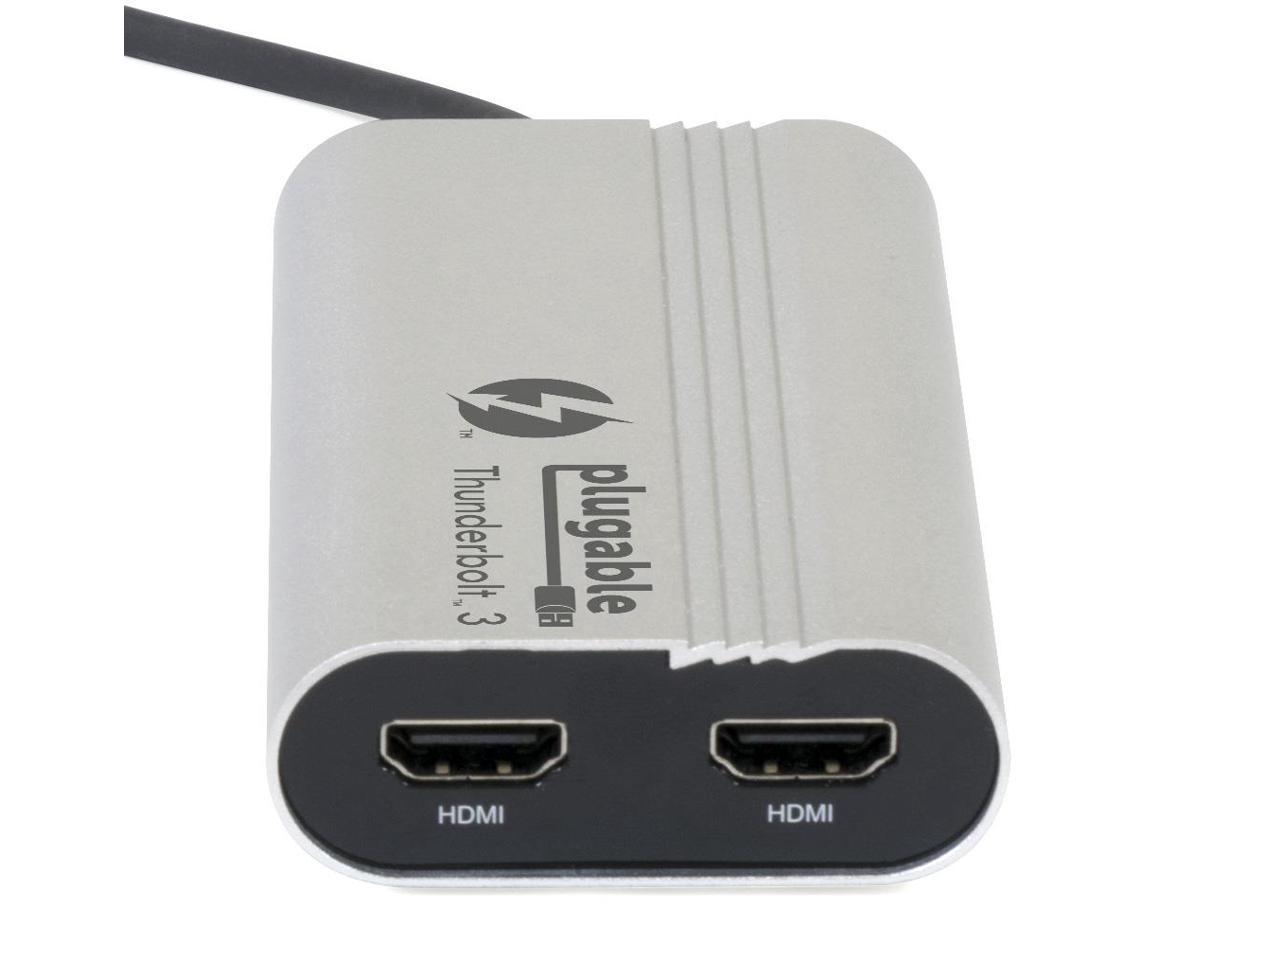 thunderbolt 3 connector to hdmi